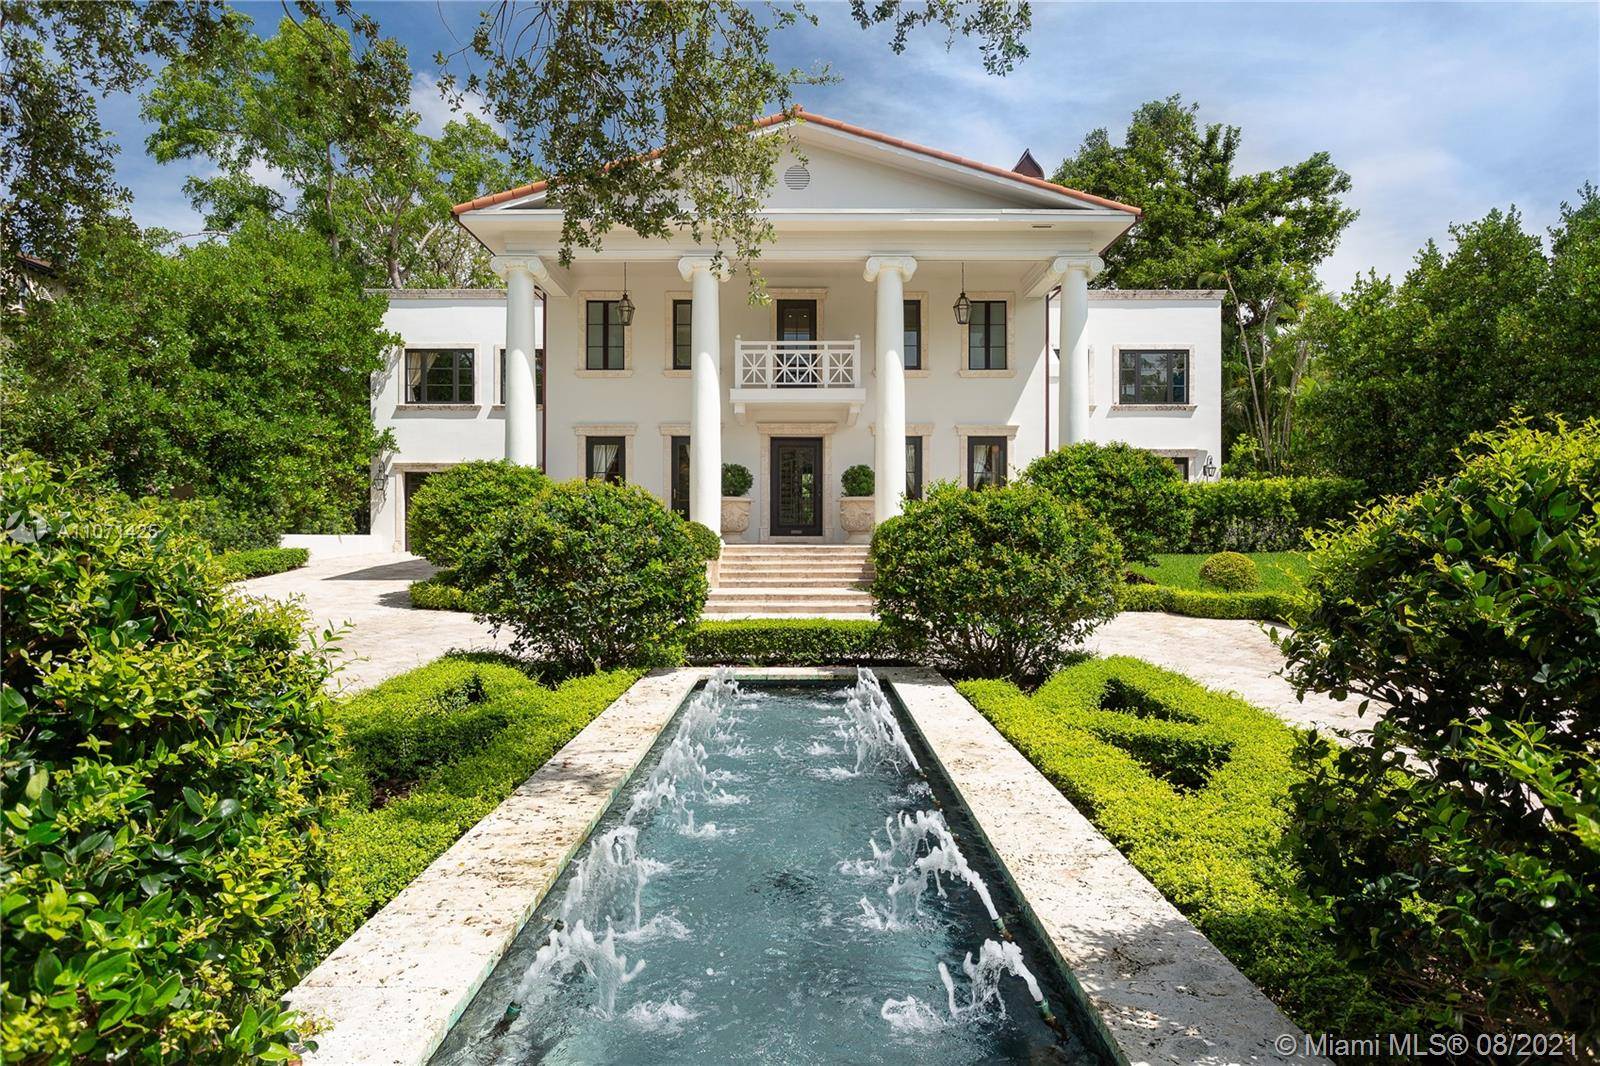 Built for John T. Peacock, one of the founders of Coconut Grove, on over 1 acre, this 7, 000 sf, two story Villa is the perfect blend of history luxury.